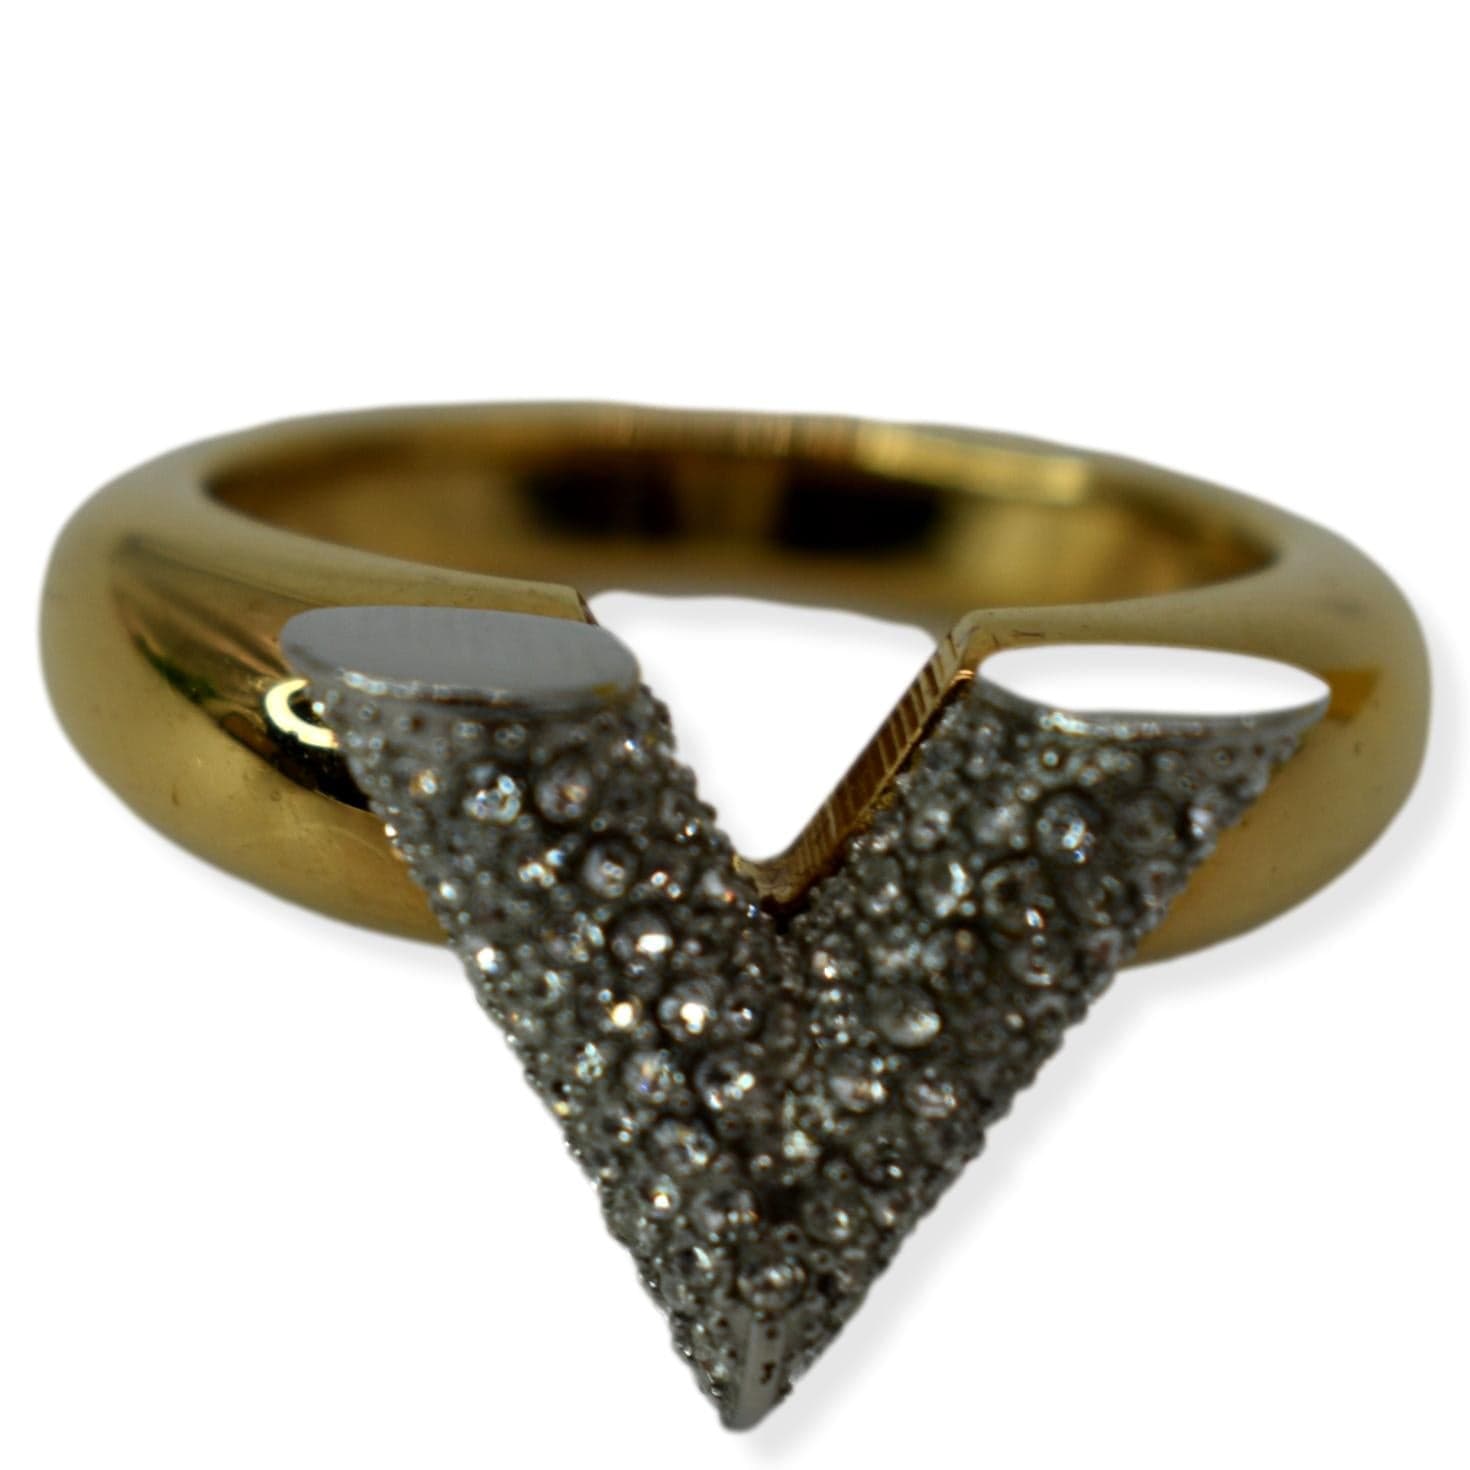 Louis Vuitton, Jewelry, Louis Vuitton V Ring Rose Gold Swarosky Crystals